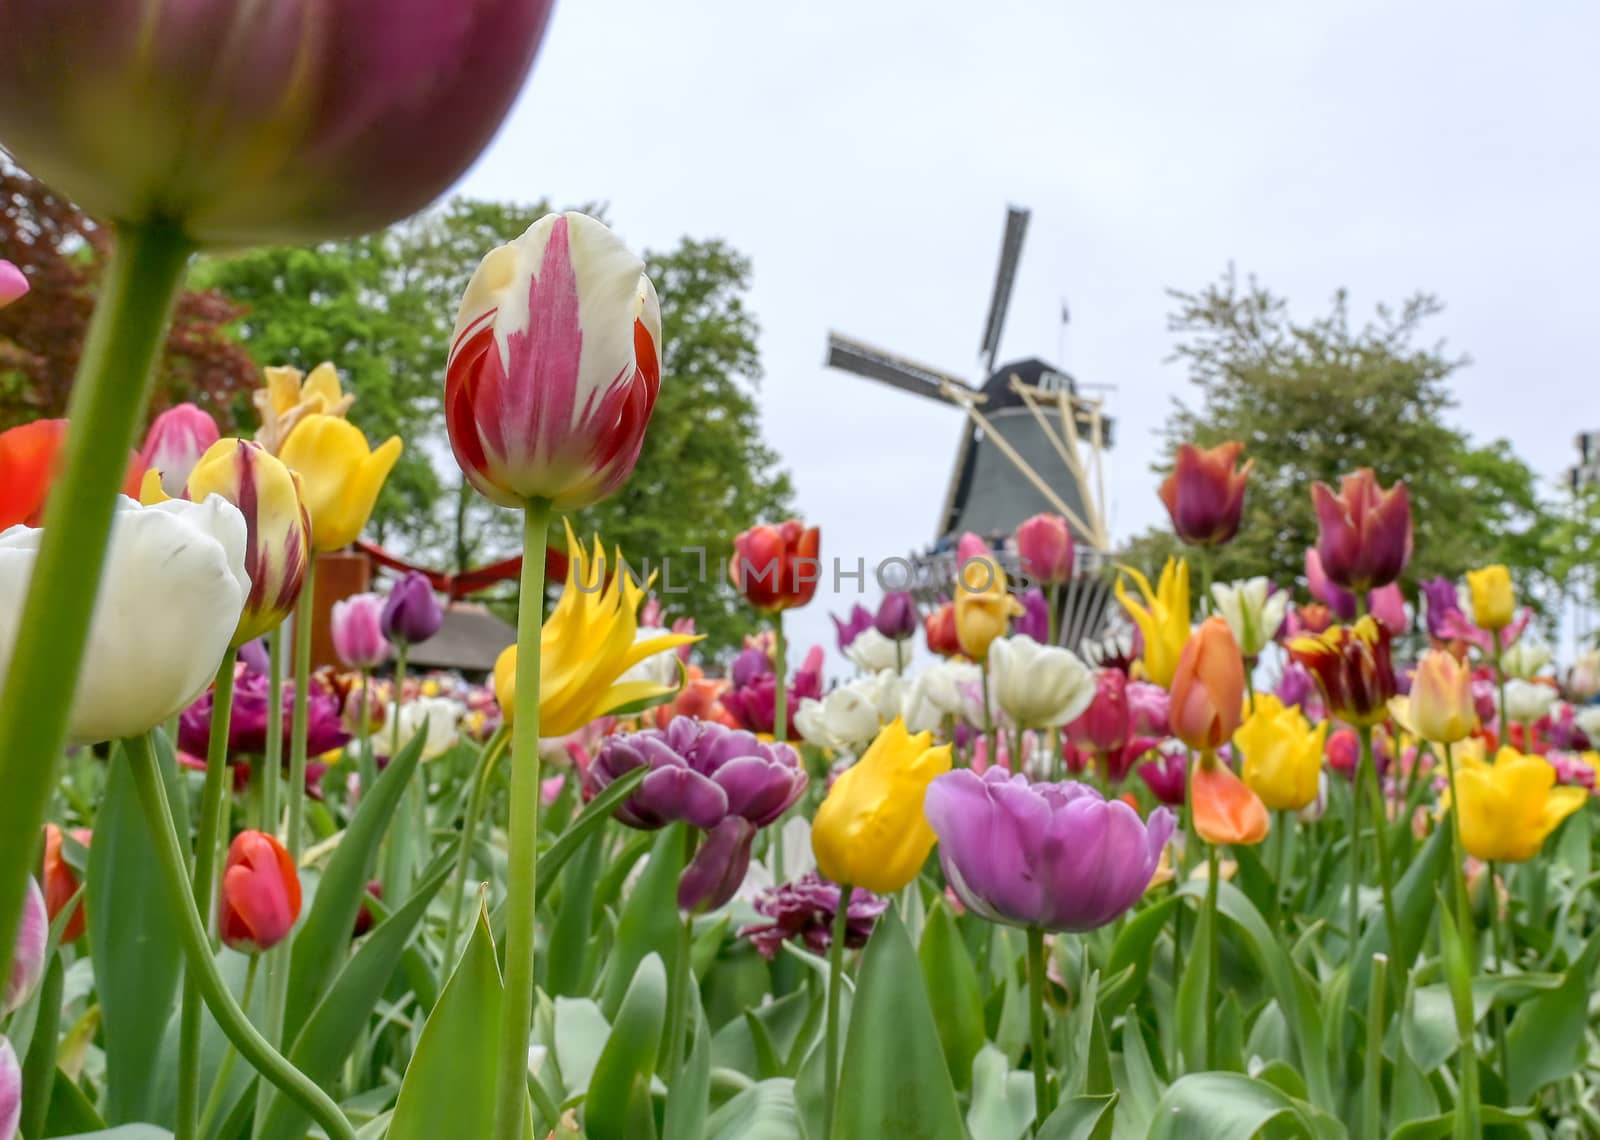 Tulips and windmills in Holland by jbyard22